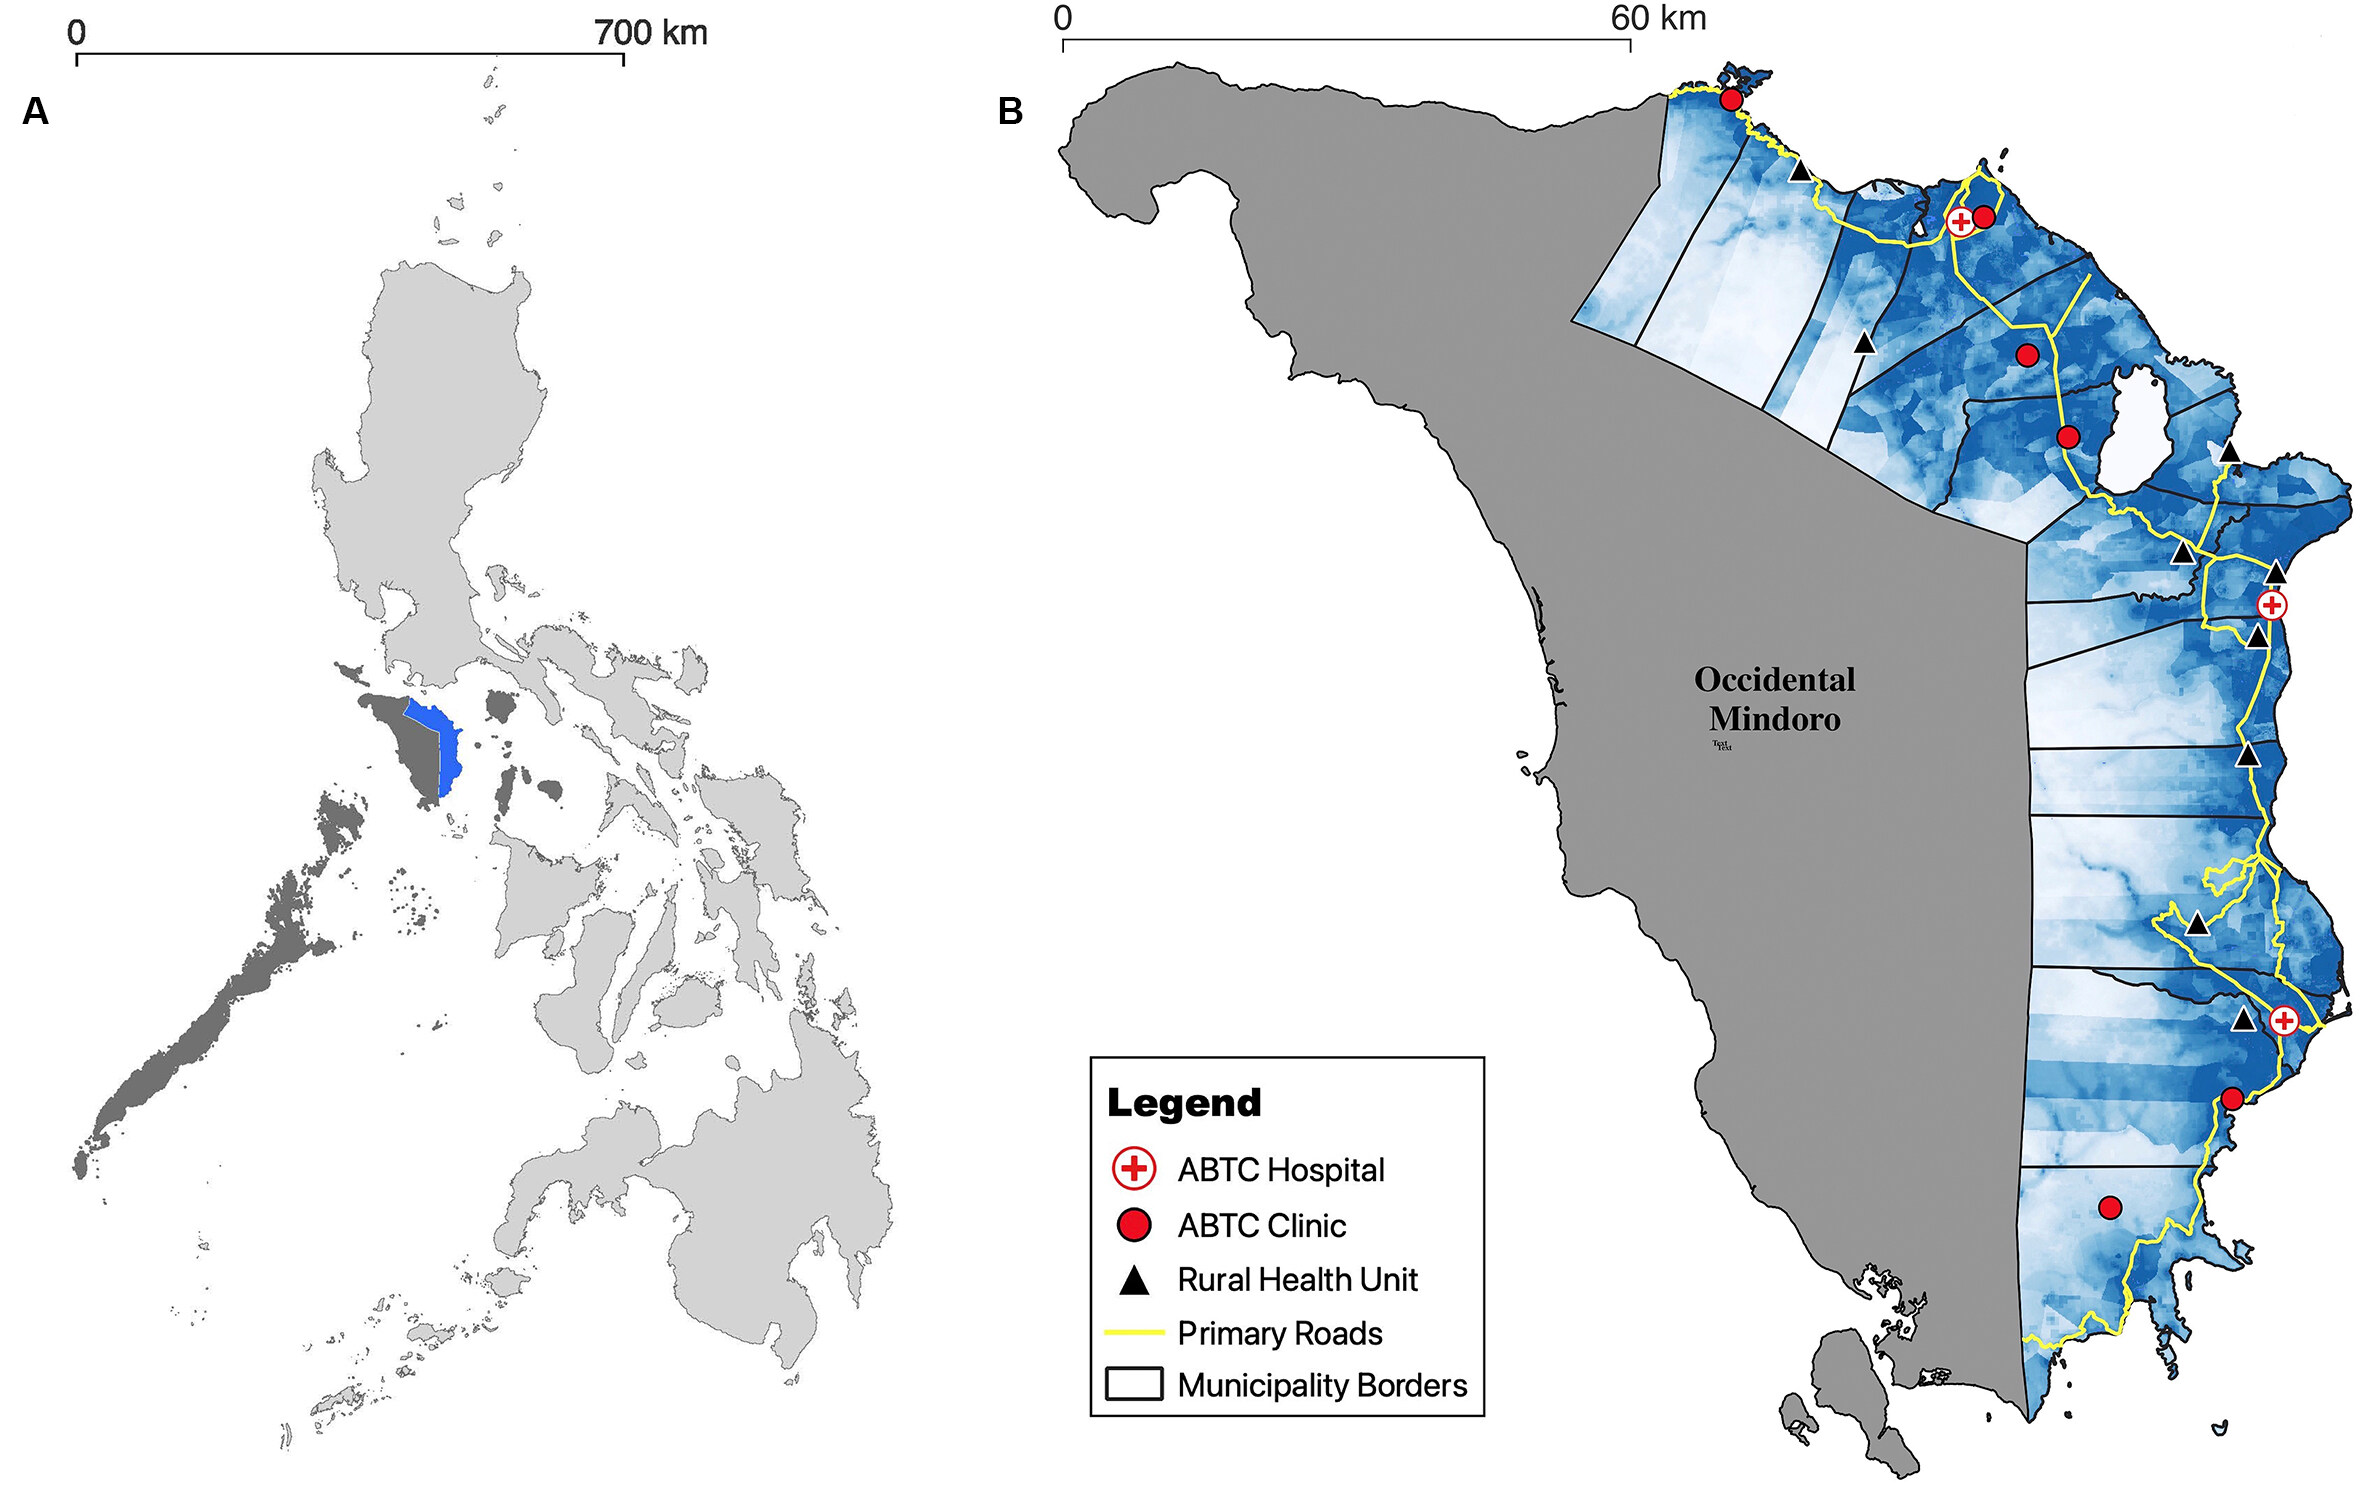 Using Integrated Bite Case Management to estimate the burden of rabies and evaluate surveillance in Oriental Mindoro, Philippines